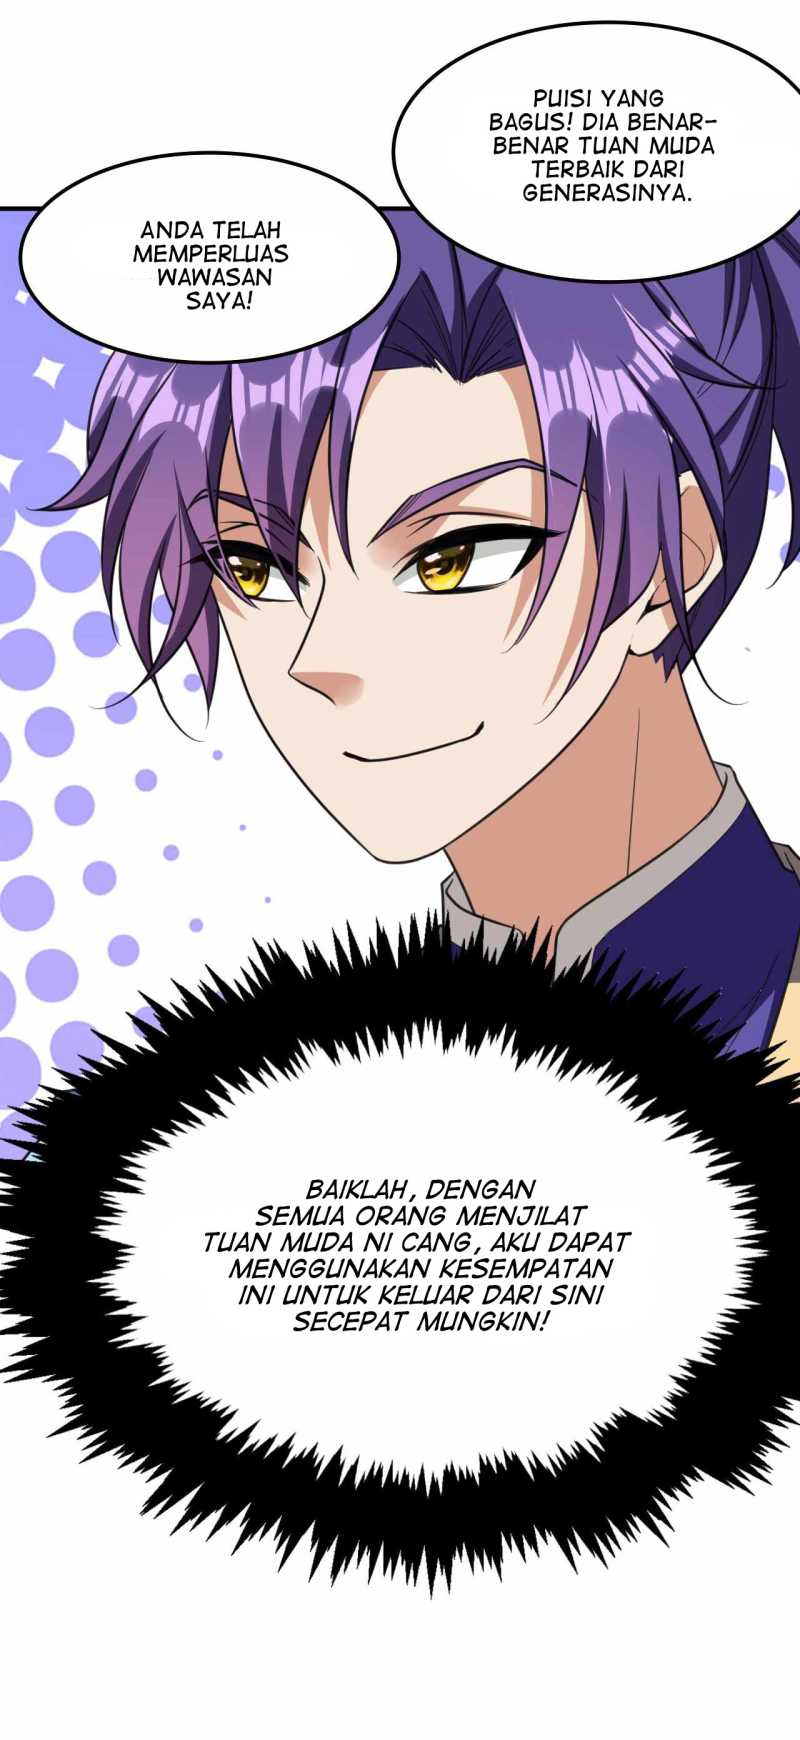 Rise of The Demon King Chapter 91